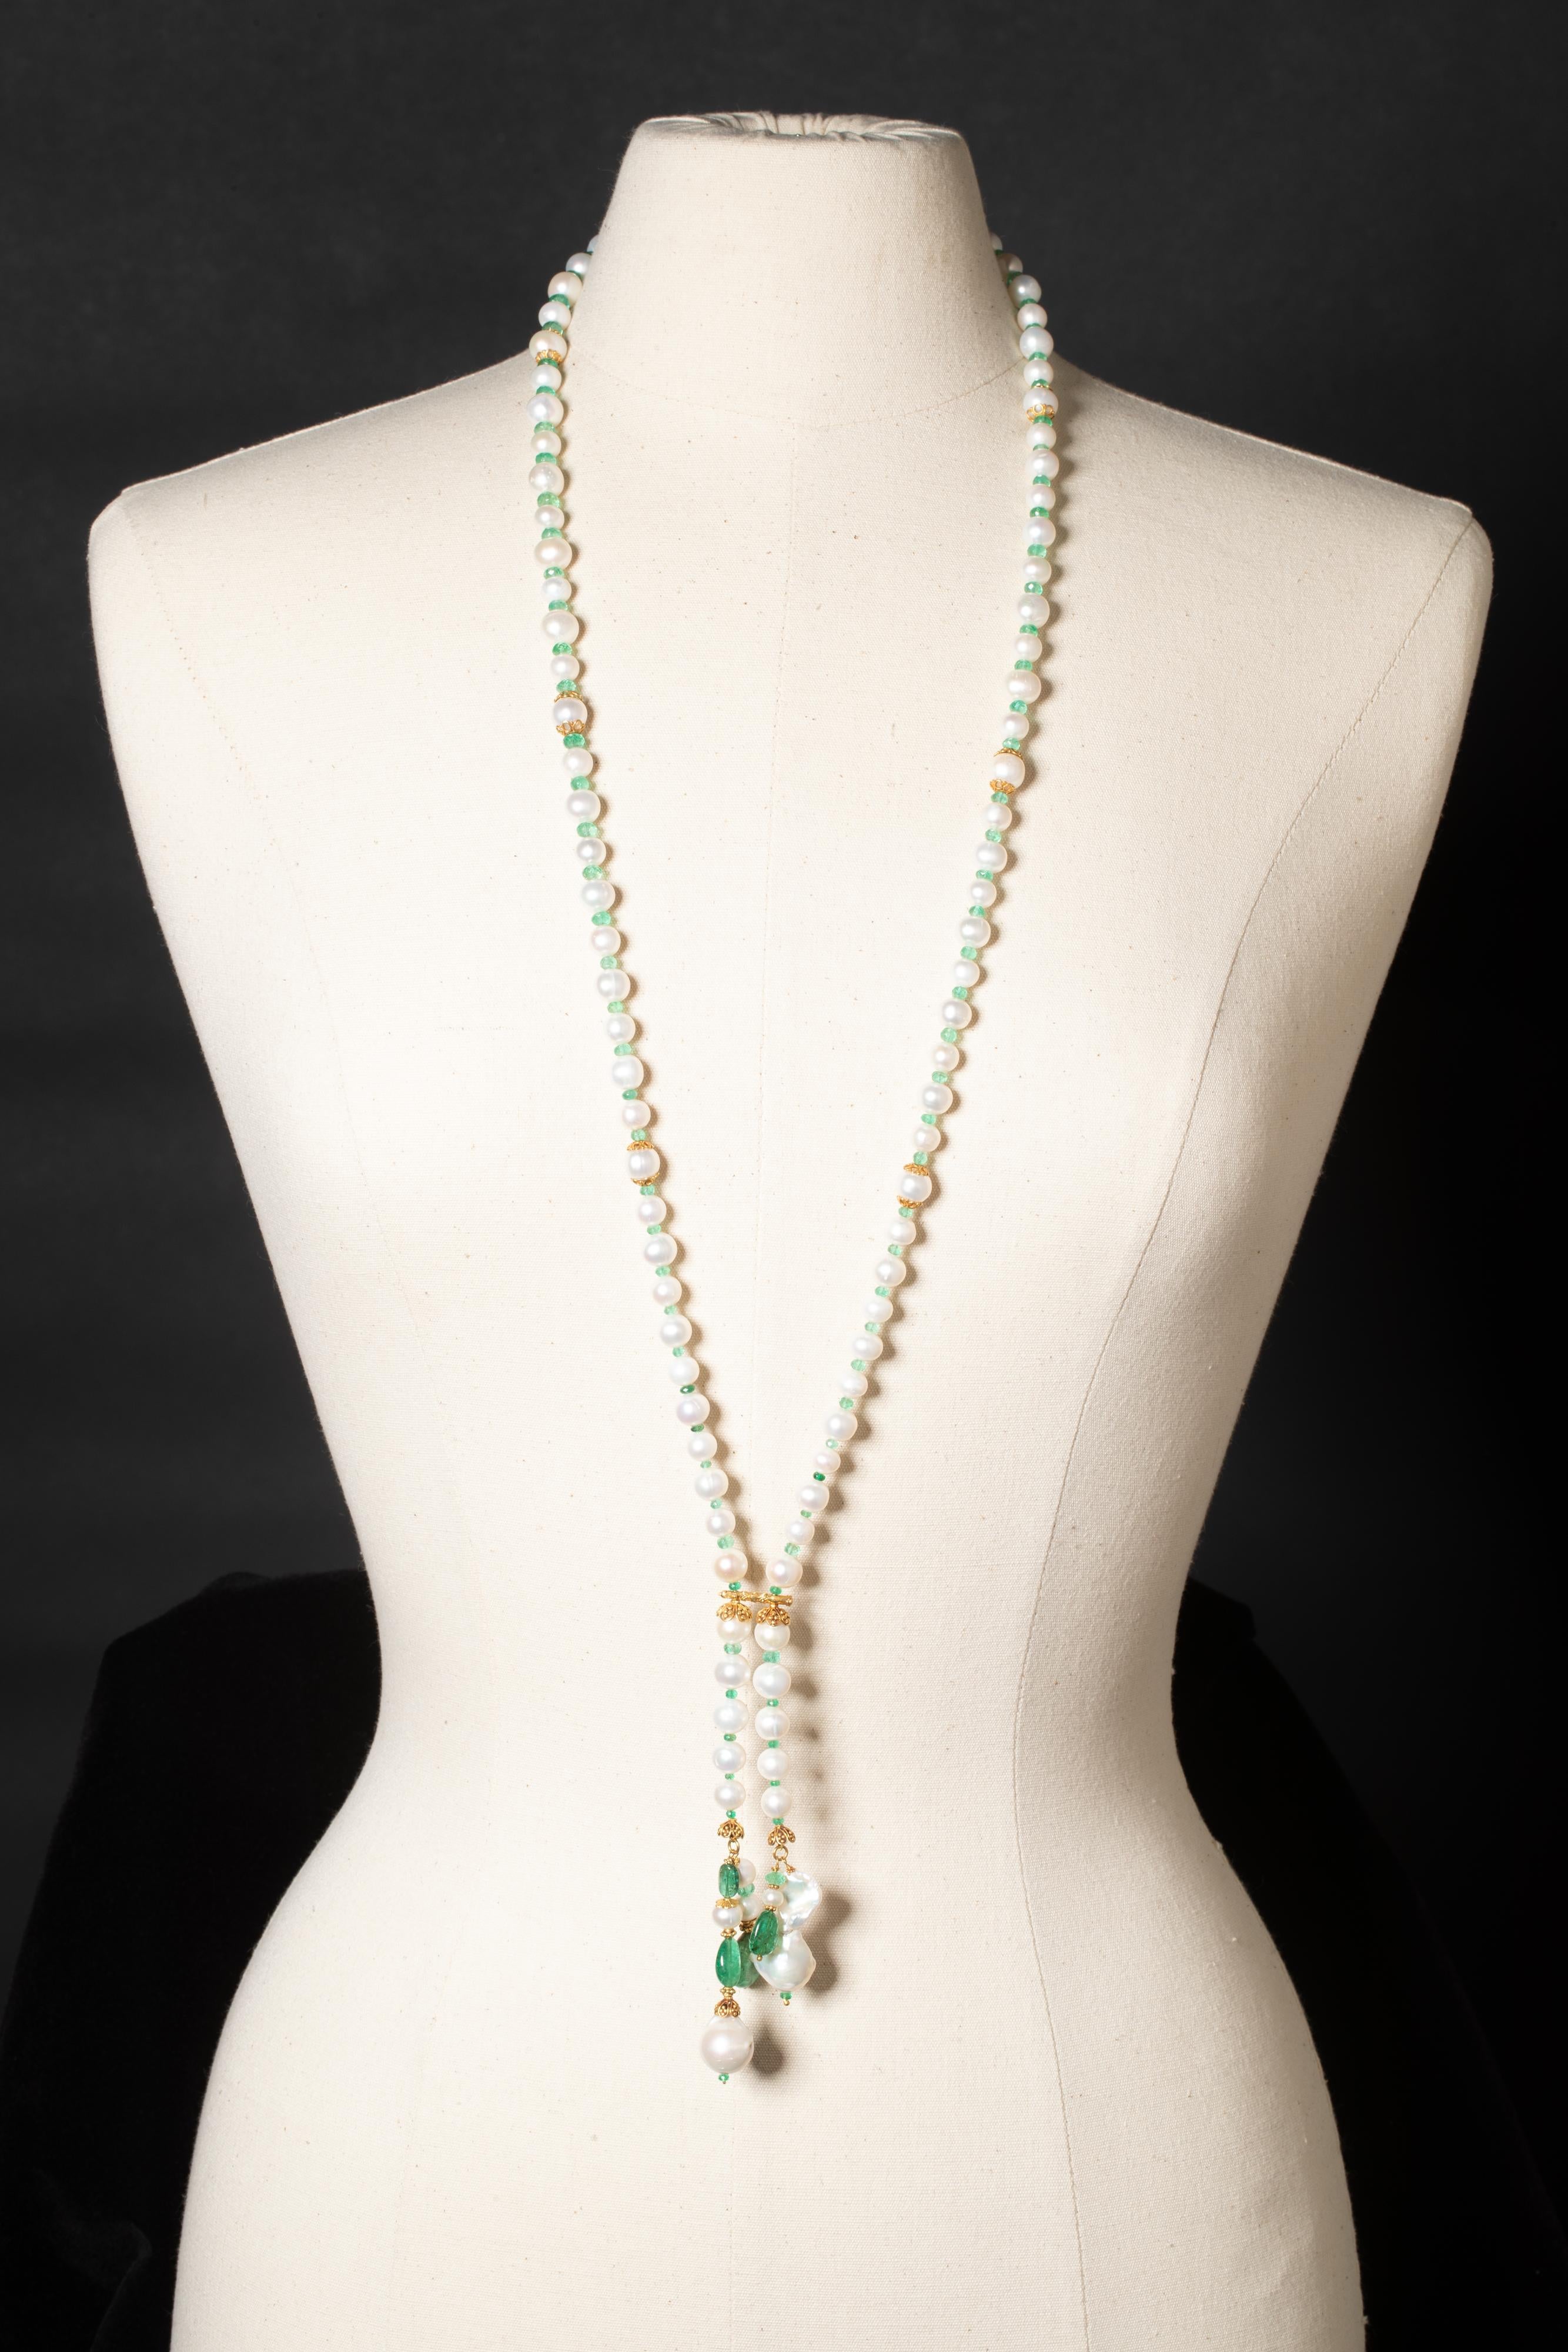 A fresh water pearl lariat necklace with faceted Colombian emeralds and 22K gold.  It also features baroque pearls at the bottom, gold beads and end caps, and tumbled emeralds.  This can be work long or short which makes it quite versatile.  The